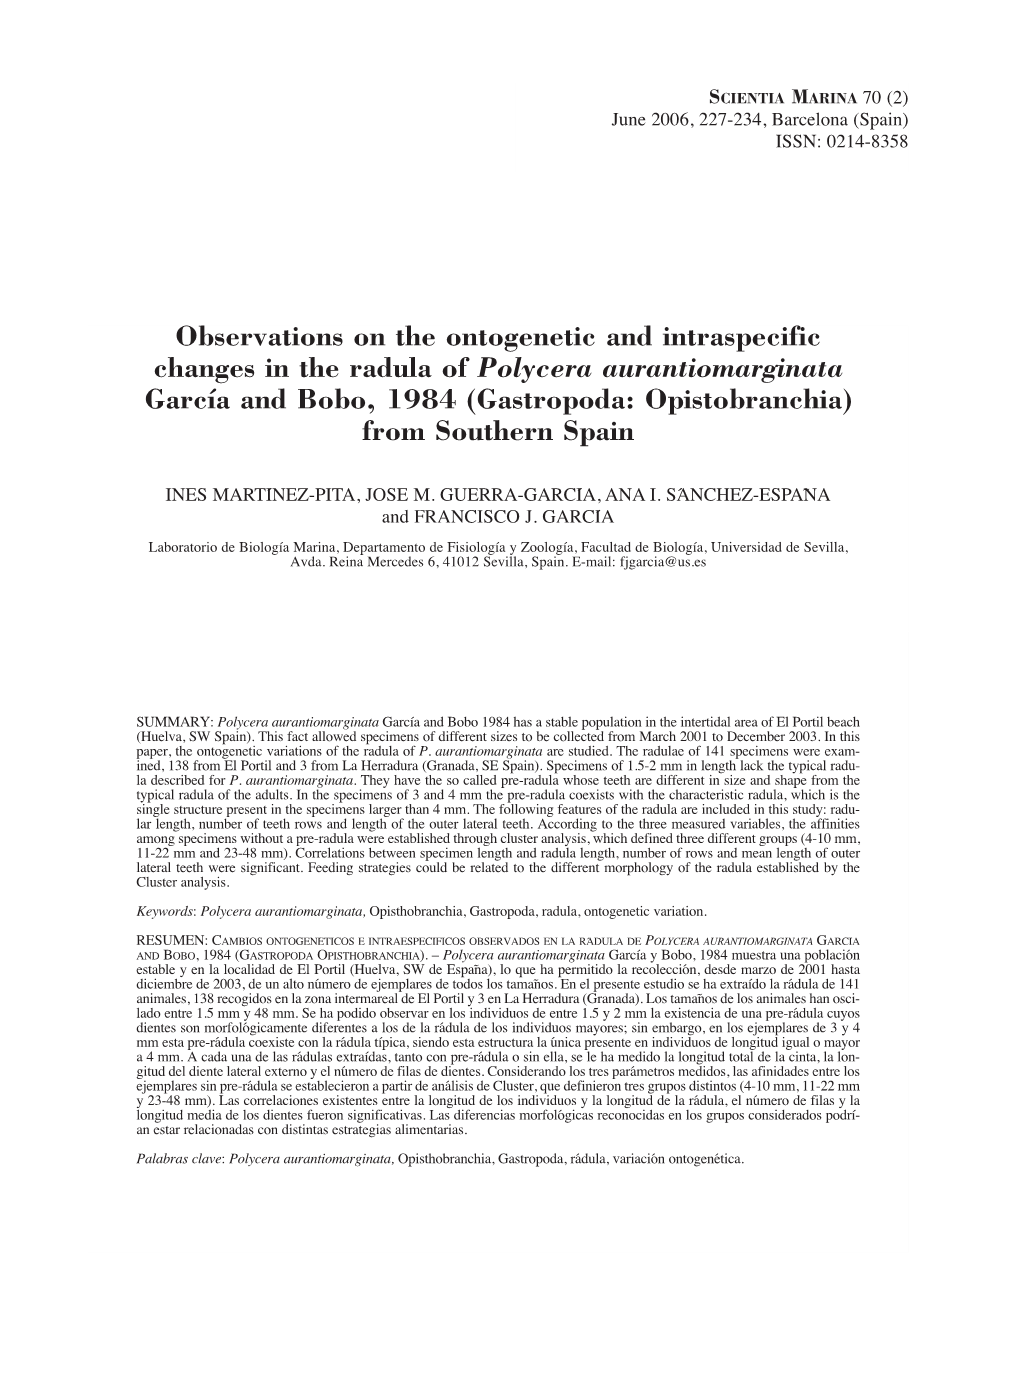 Observations on the Ontogenetic and Intraspecific Changes in the Radula of Polycera Aurantiomarginata García and Bobo, 1984 (Gastropoda: Opistobranchia) from Southern Spain